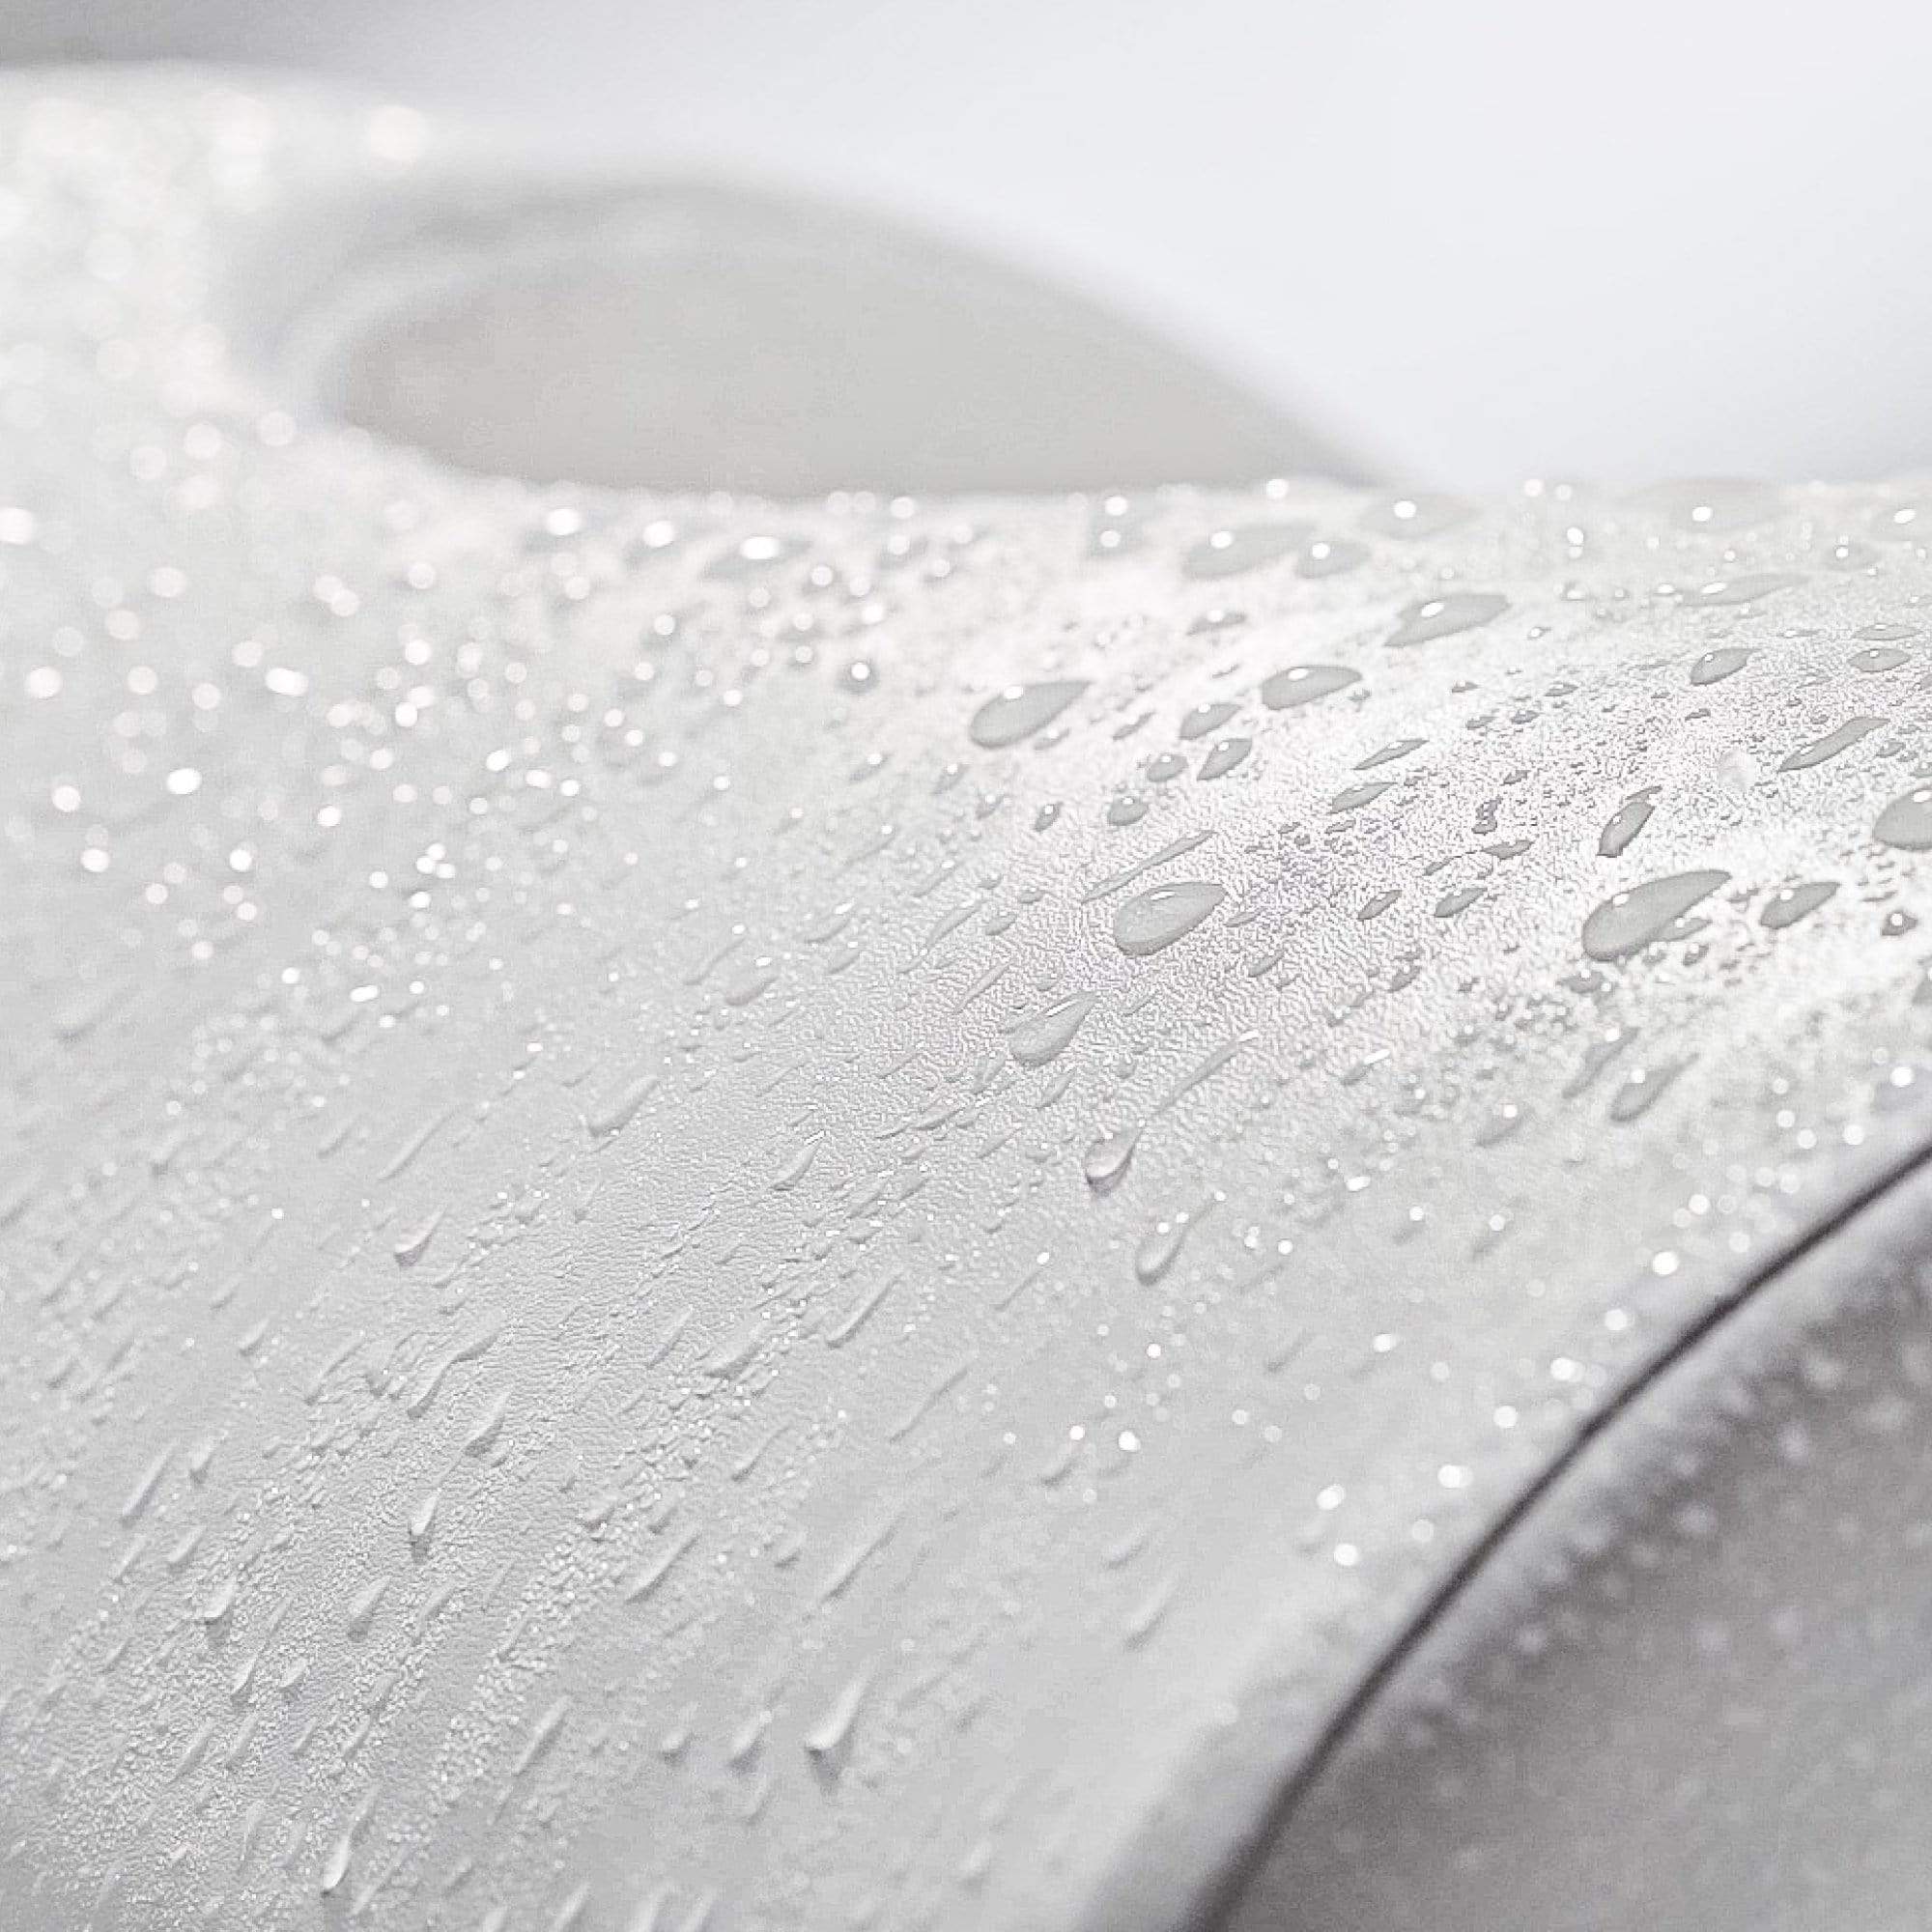 LUXE Footstool up-close with water droplets to showcase waterproof PU leather